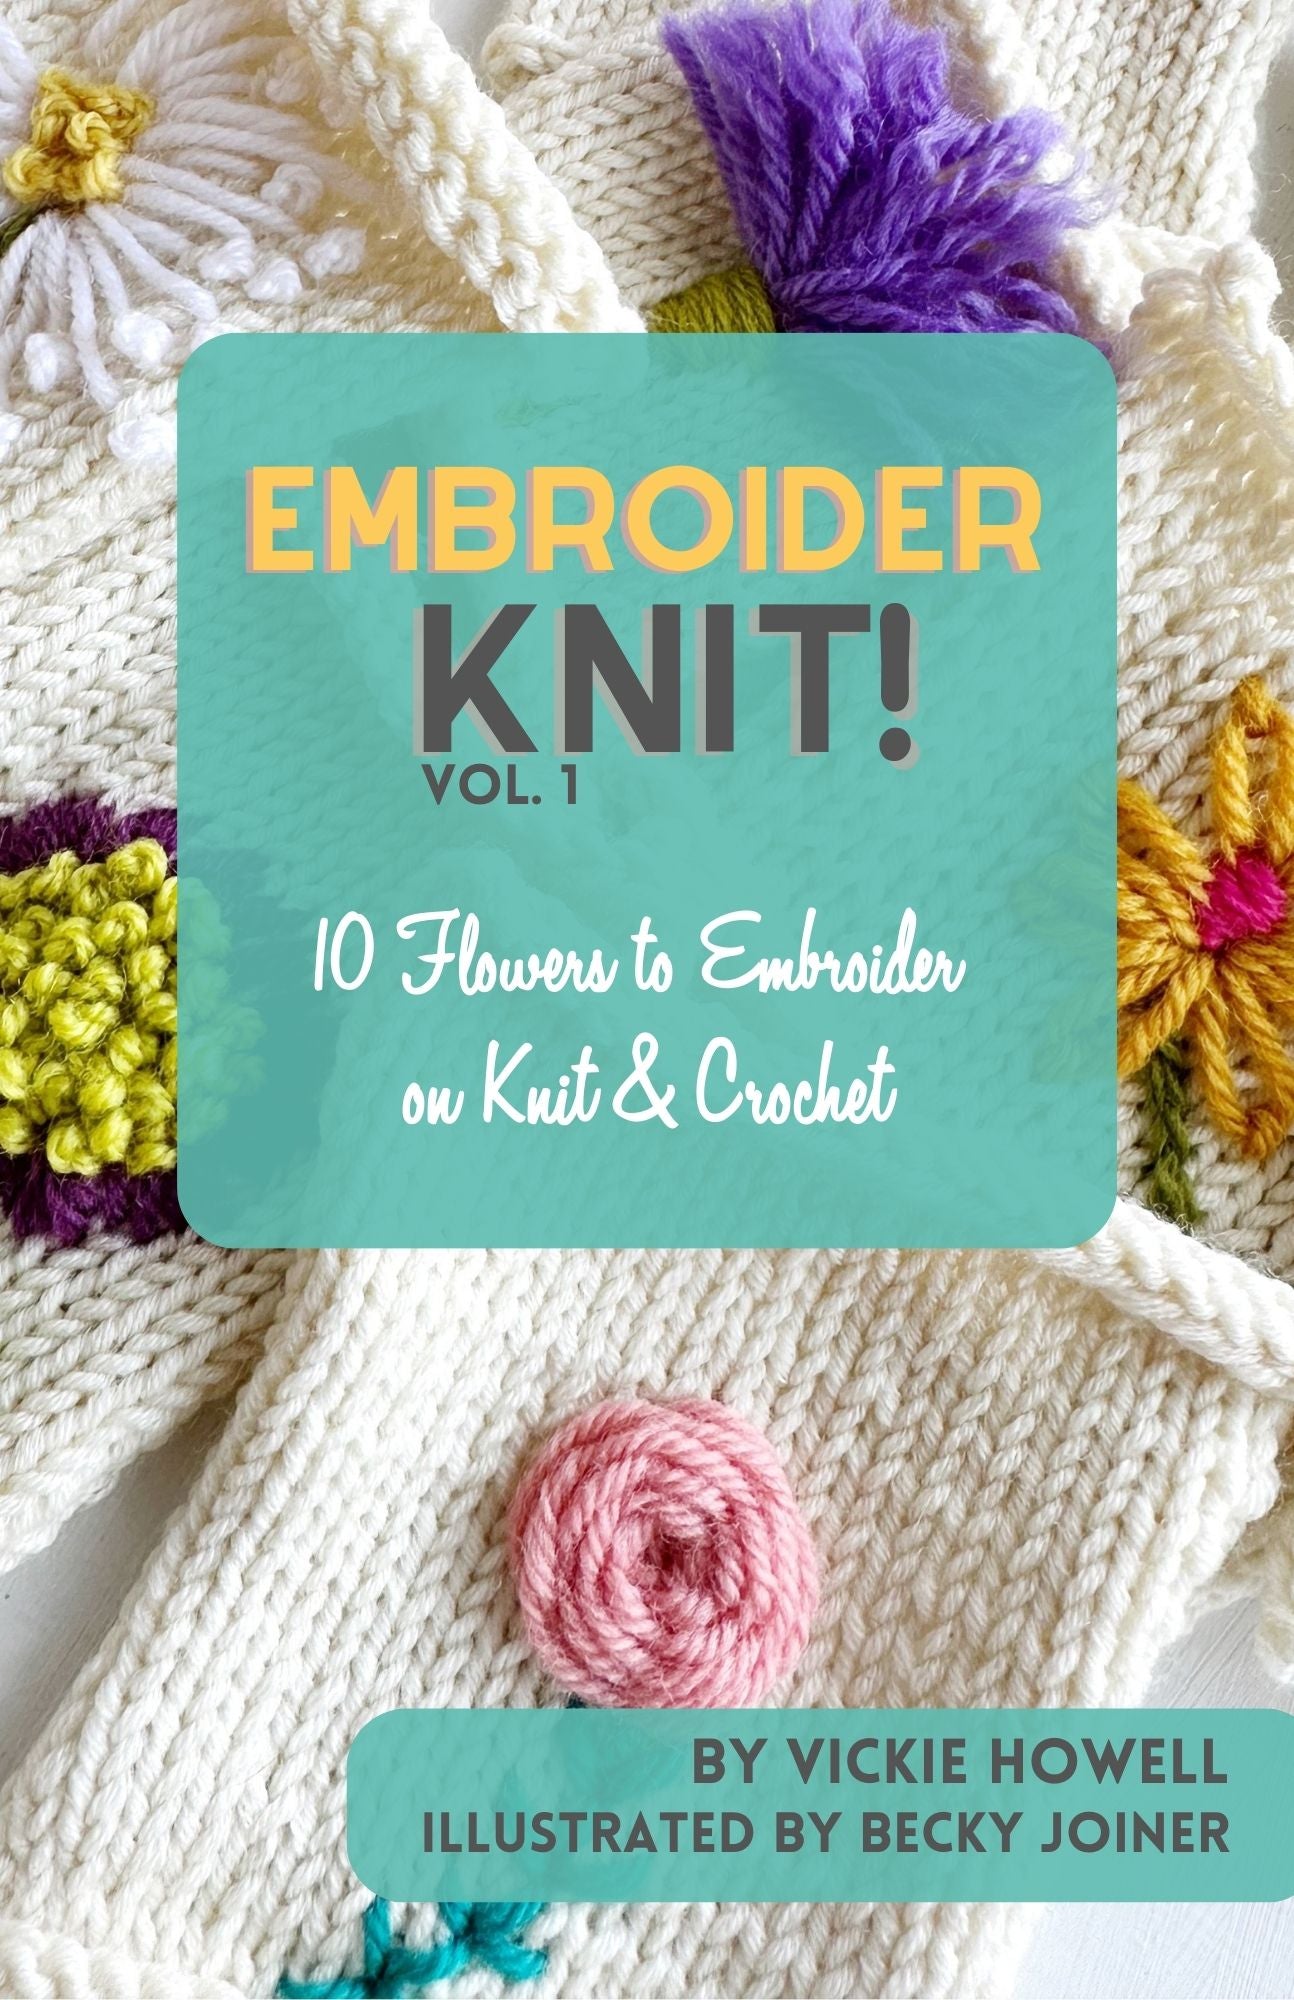 Embroider Knit! Vol. 1 Booklet – YarnYAY!